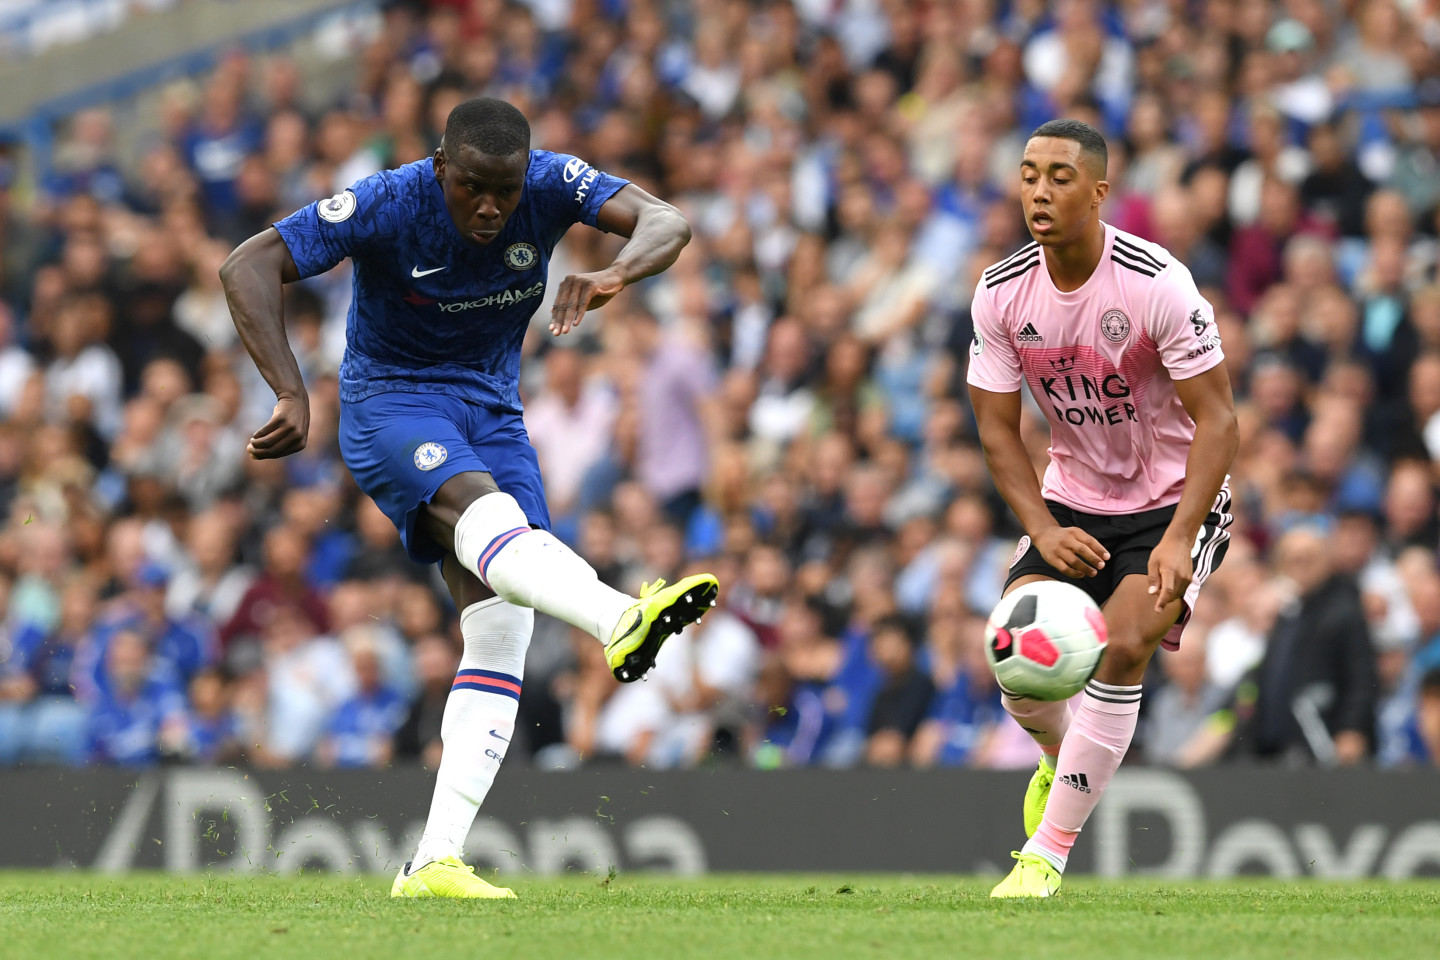 Everton's Kurt Zouma determined to return to Chelsea and earn a